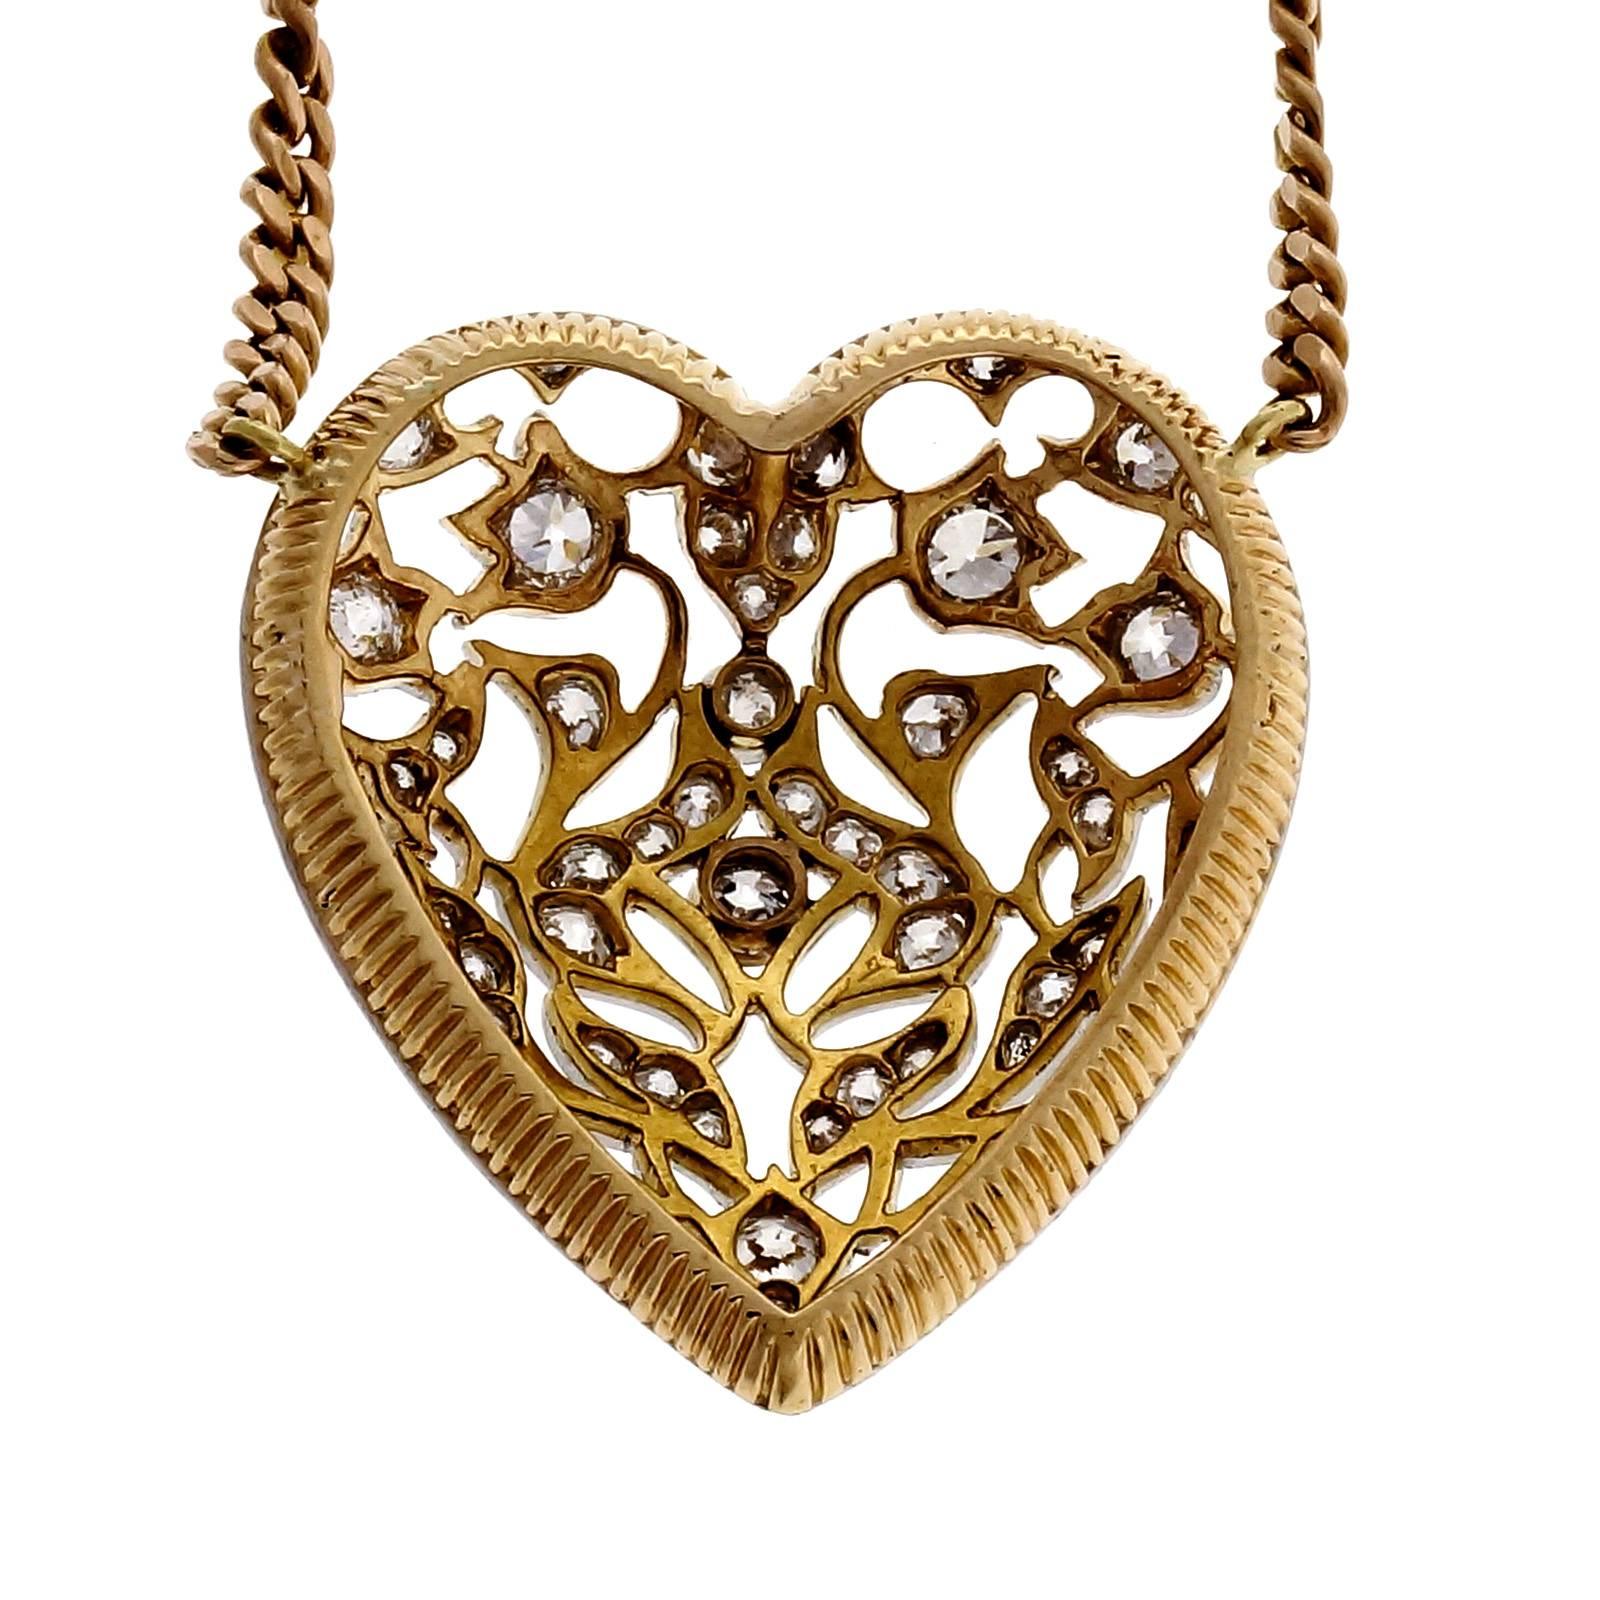 Open work vine and flower design full size heart pendant in 14k gold with Platinum top bead set with old European cut diamonds and attached to a handmade link chain 22 inches long. Circa 1920.

60 round old European cut diamonds, approx. total